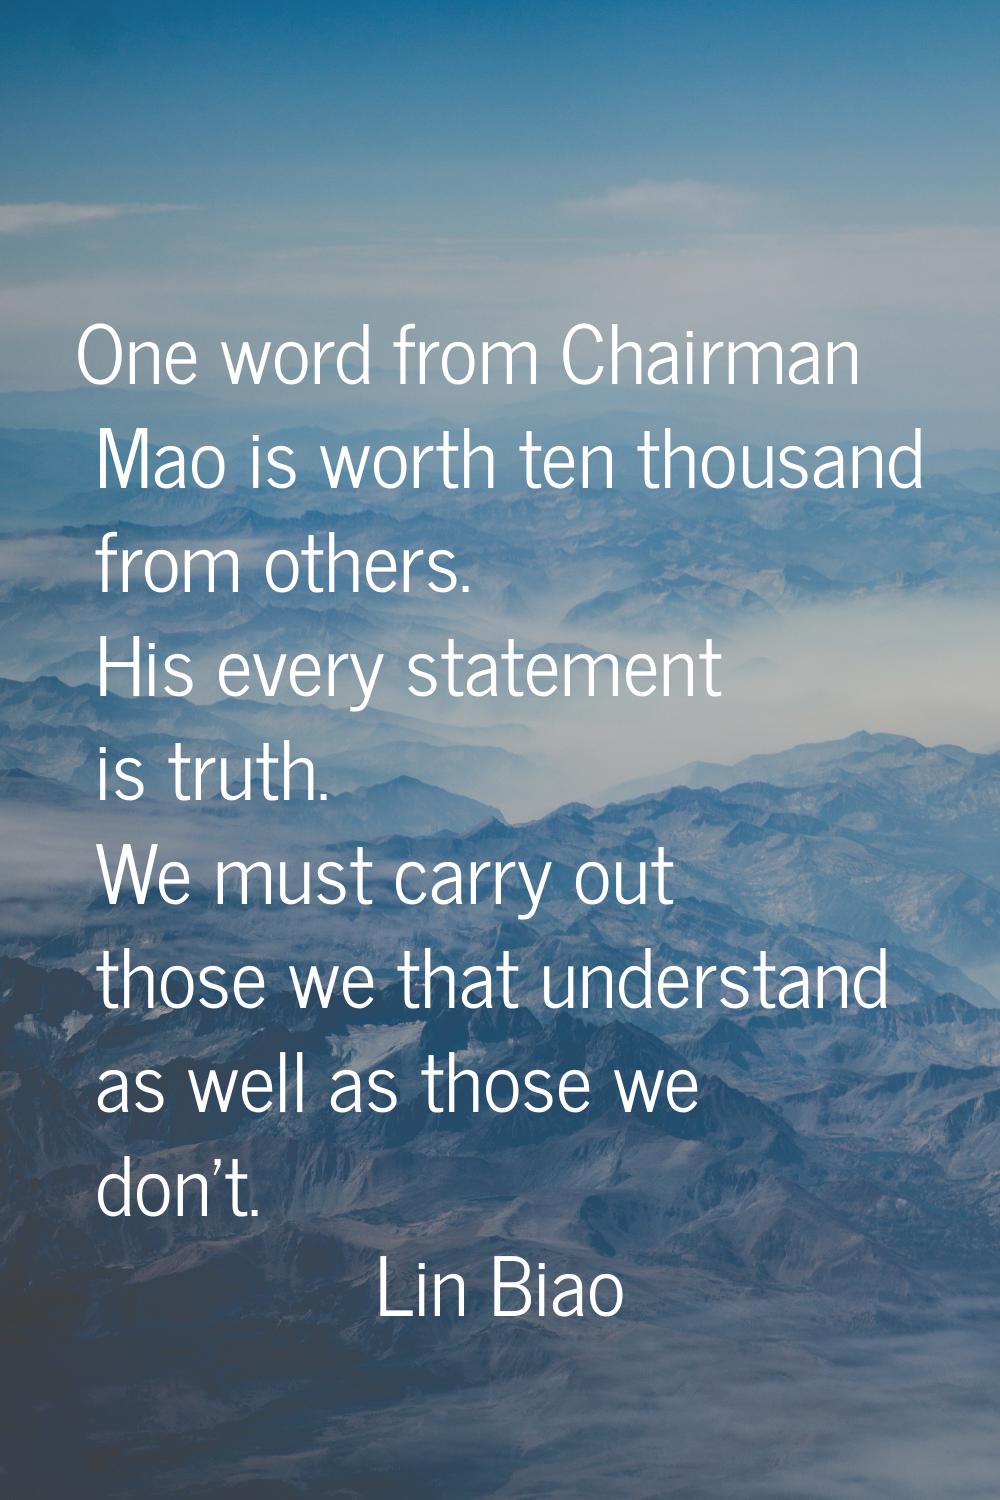 One word from Chairman Mao is worth ten thousand from others. His every statement is truth. We must